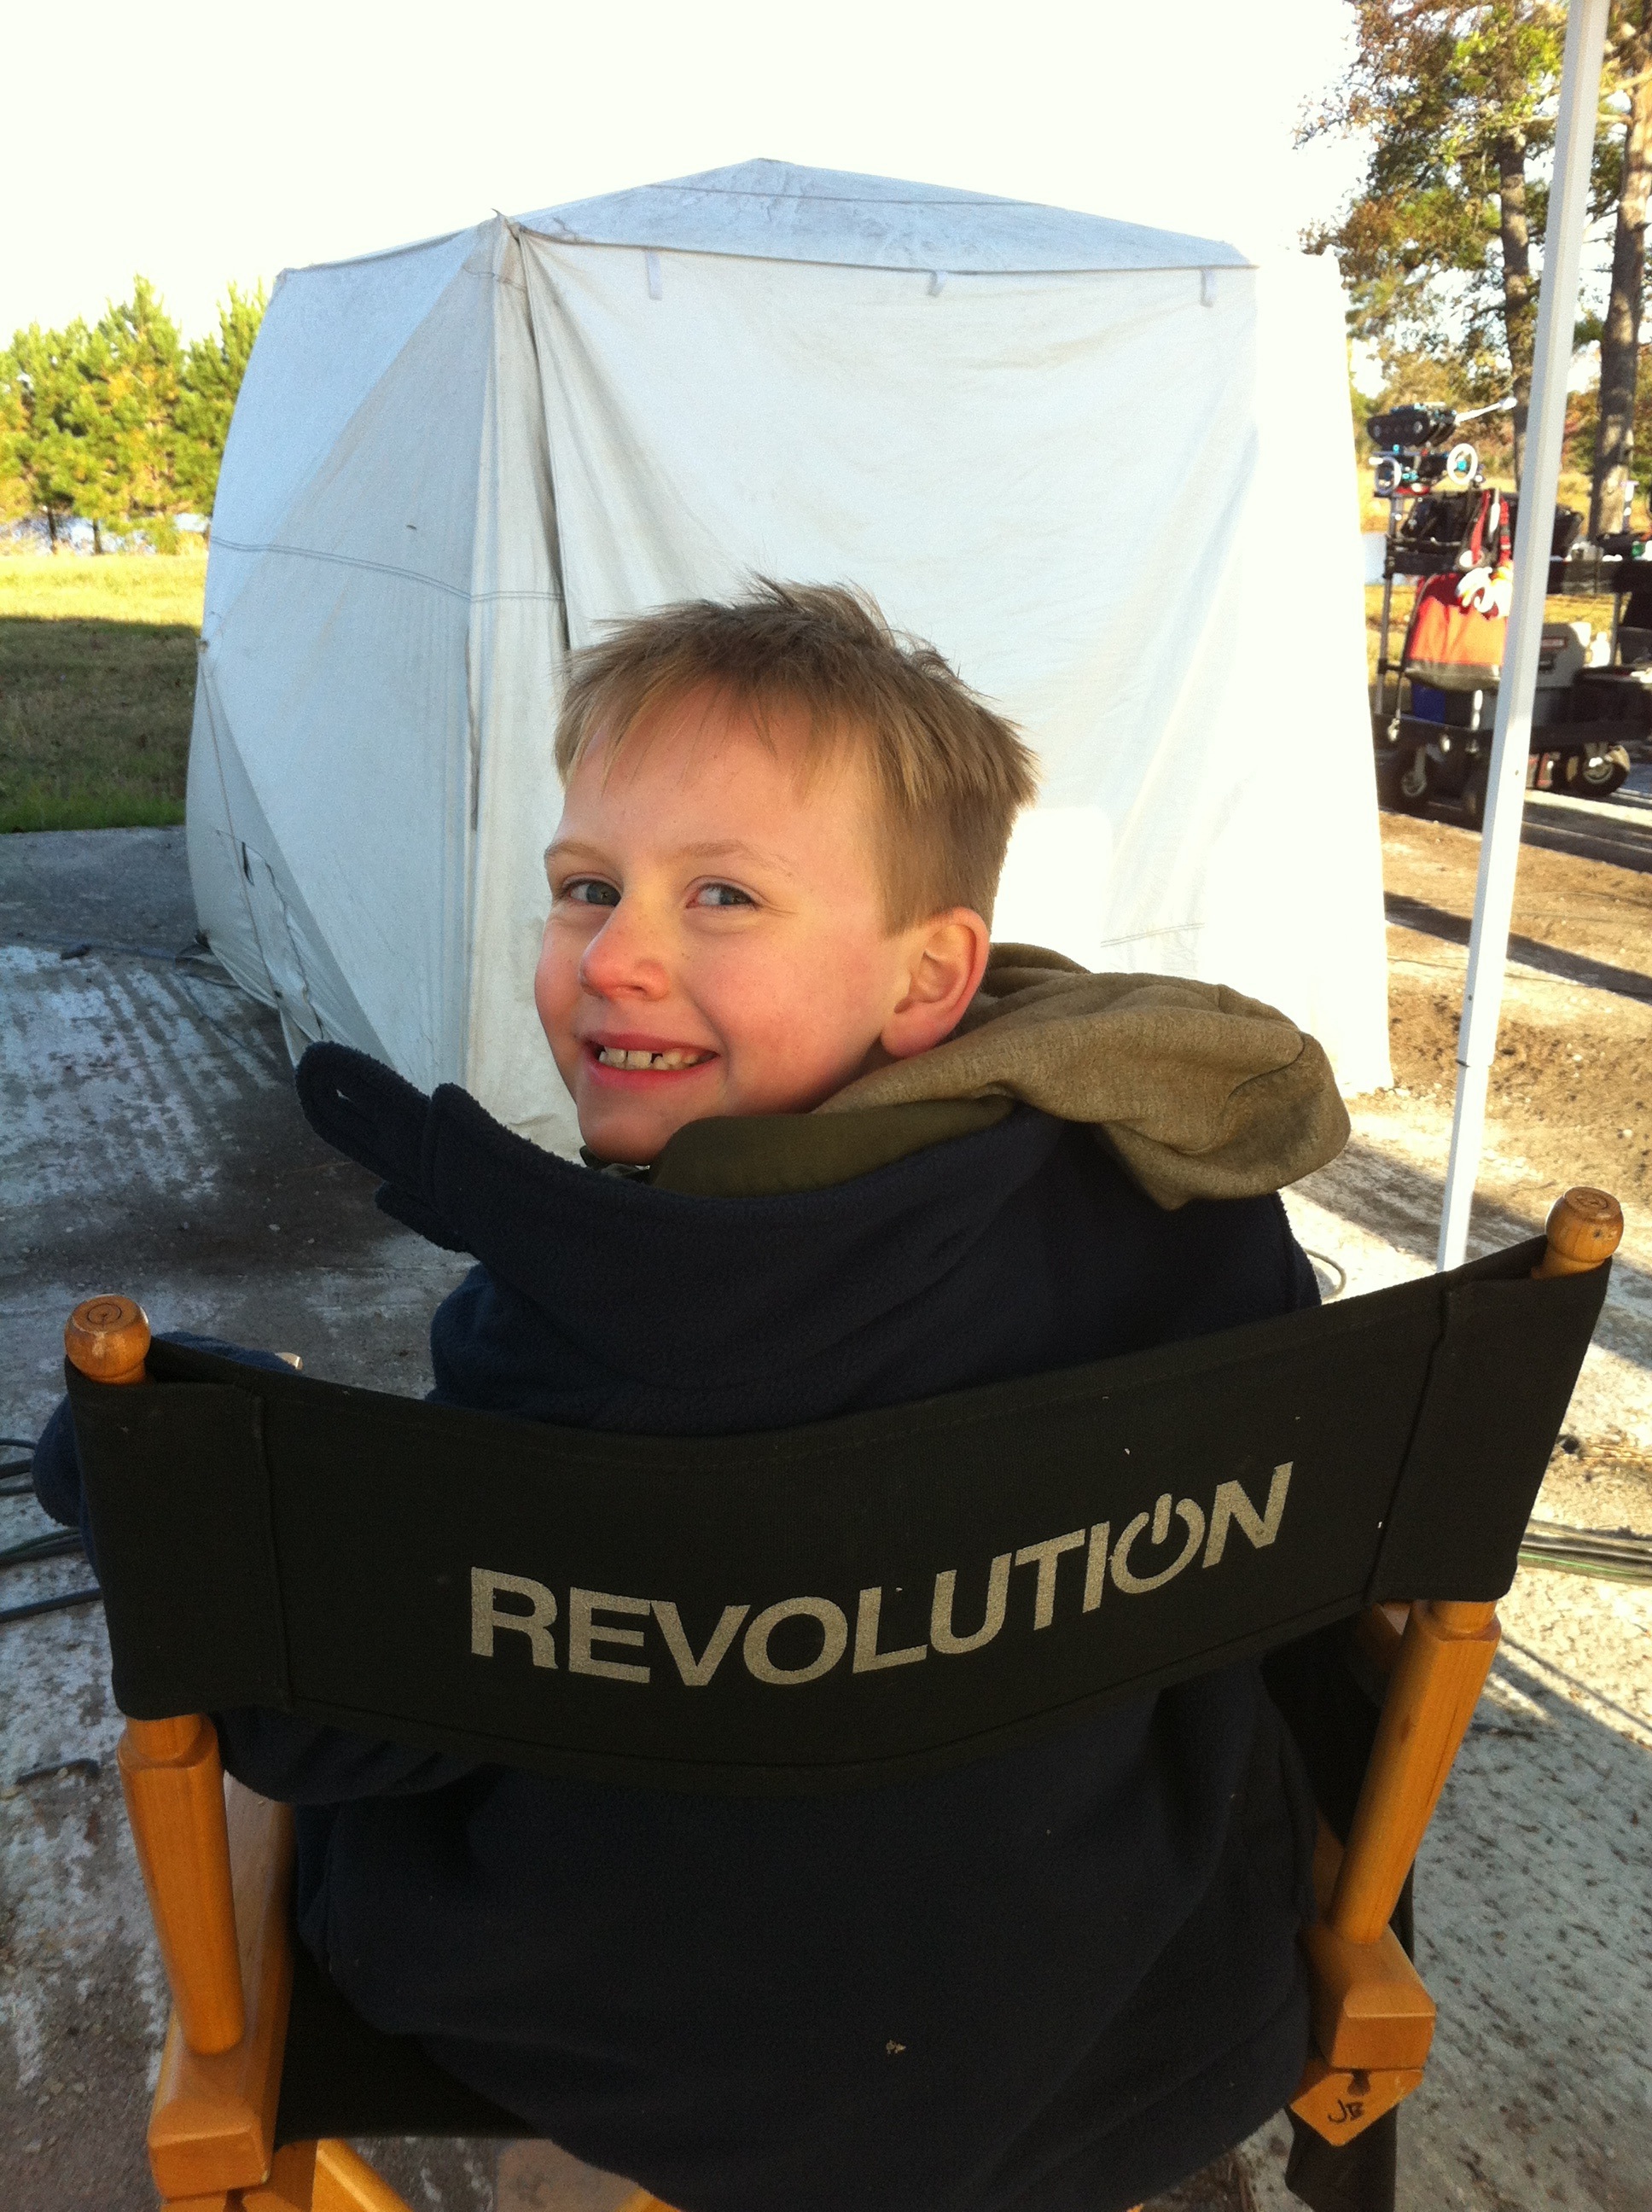 On set of NBC's Revolution. Major's episode will air in the Spring, 2013